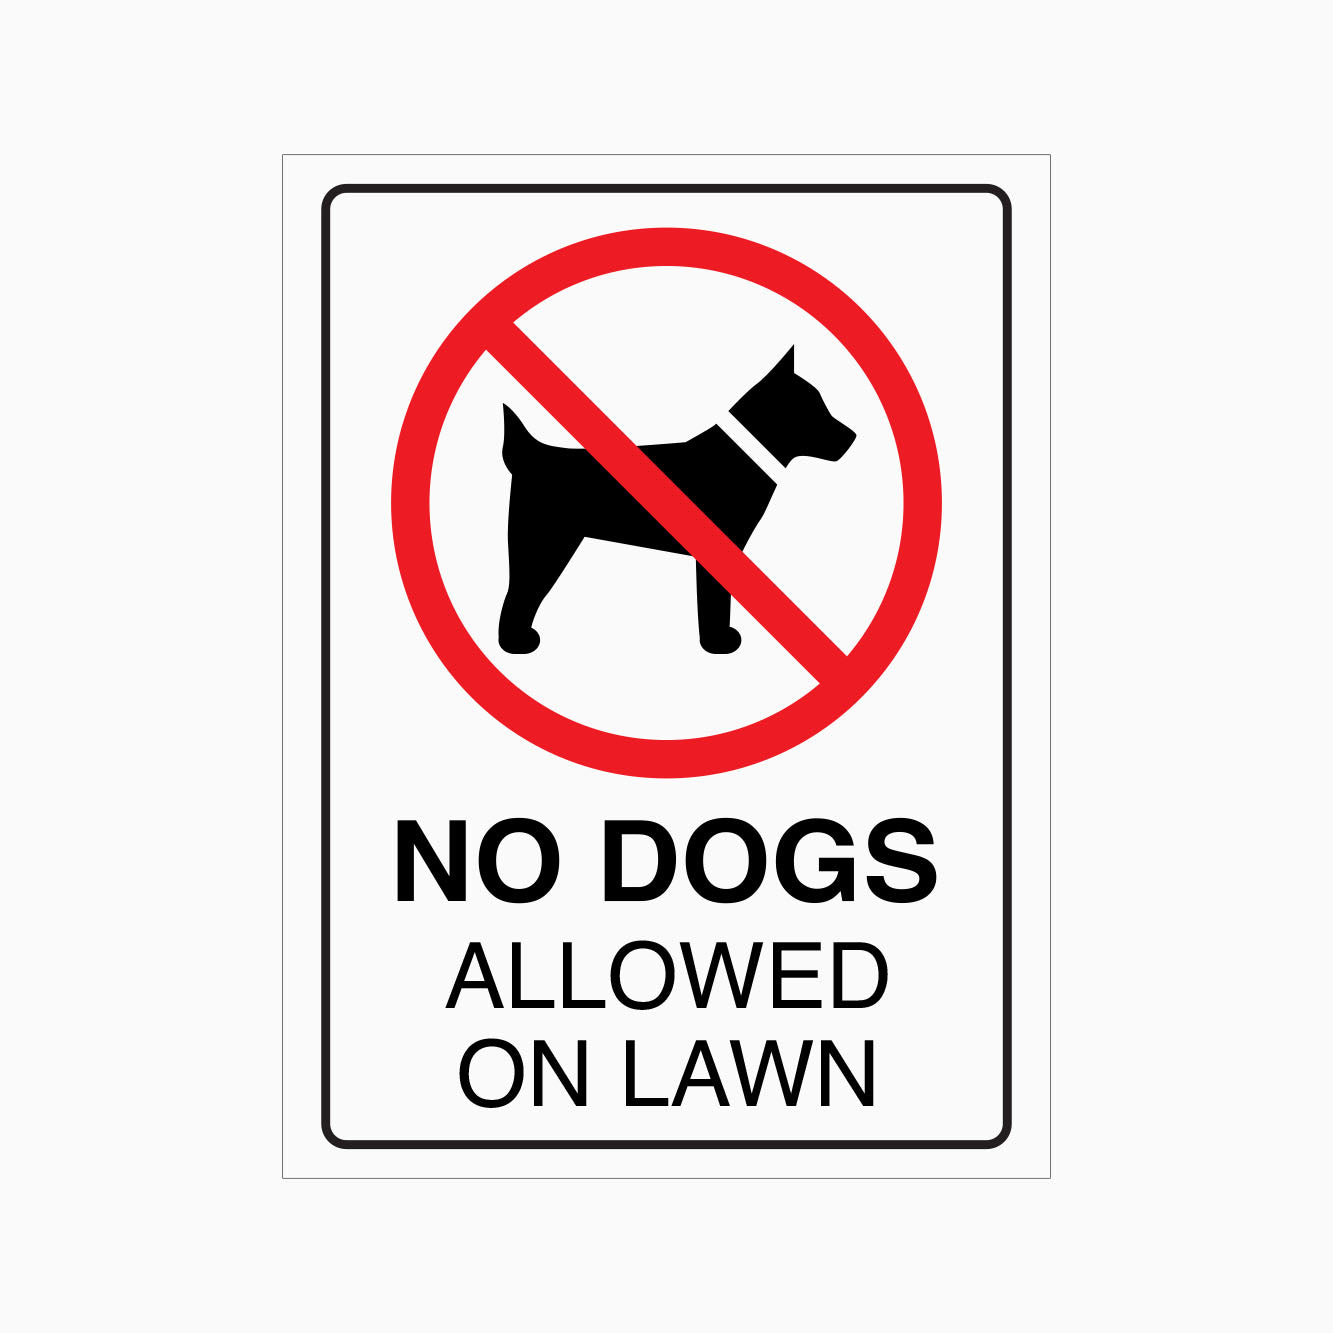 NO DOGS ALLOWED ON LAWN SIGN